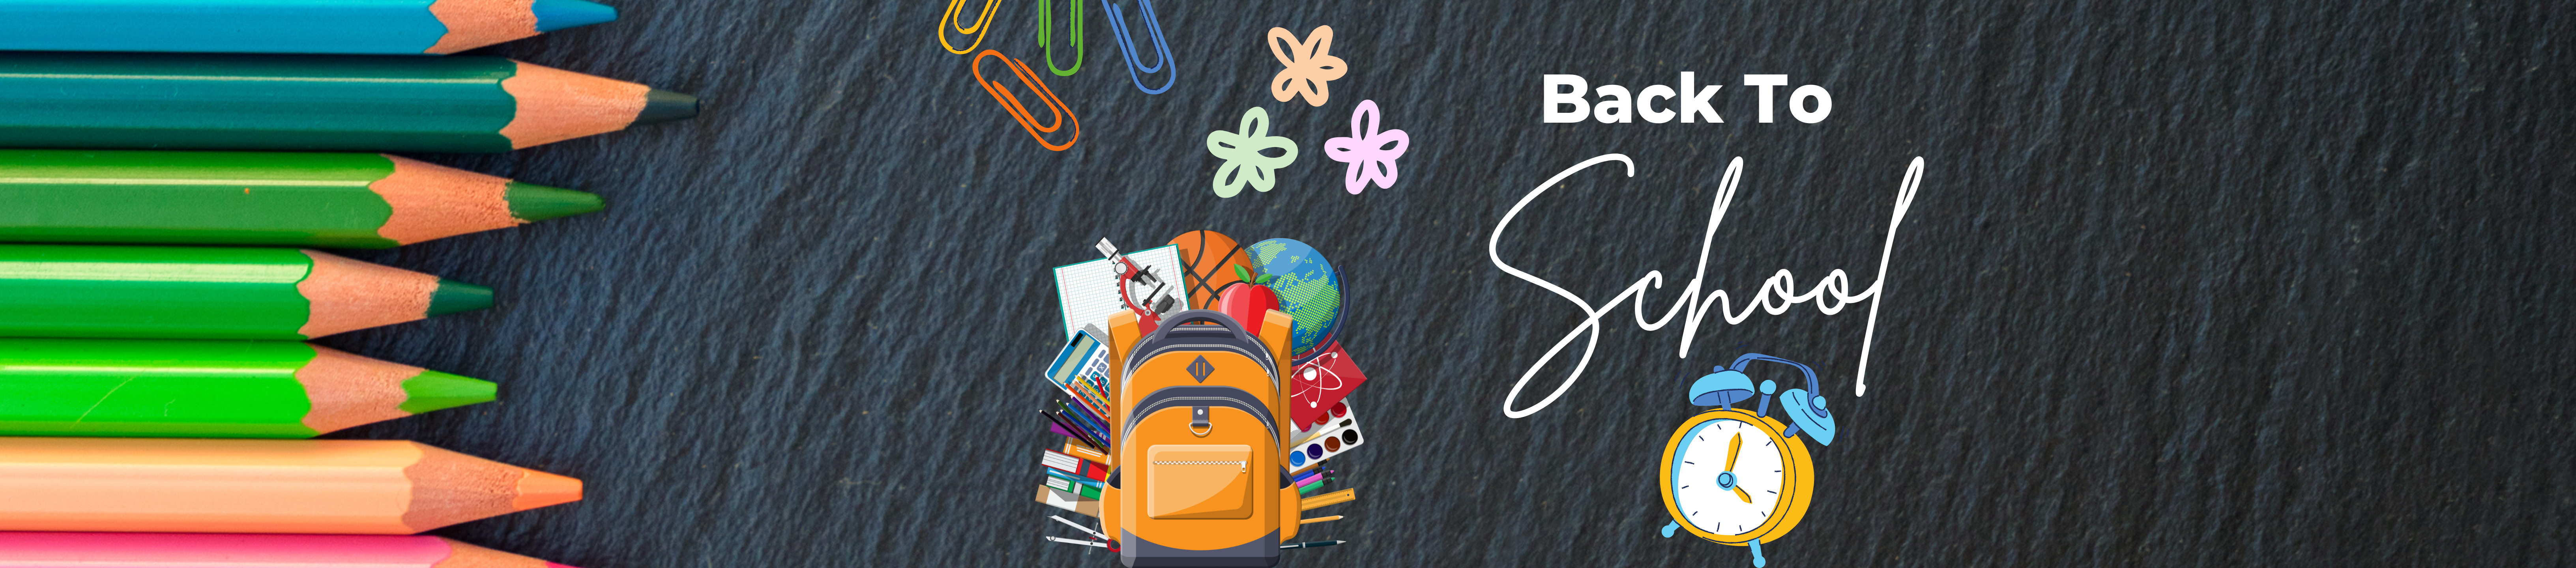 back to school image of a chalkboard with colored pencils, a backpack with school supplies, paper clips, hand drawn flowers, and an alarm clock